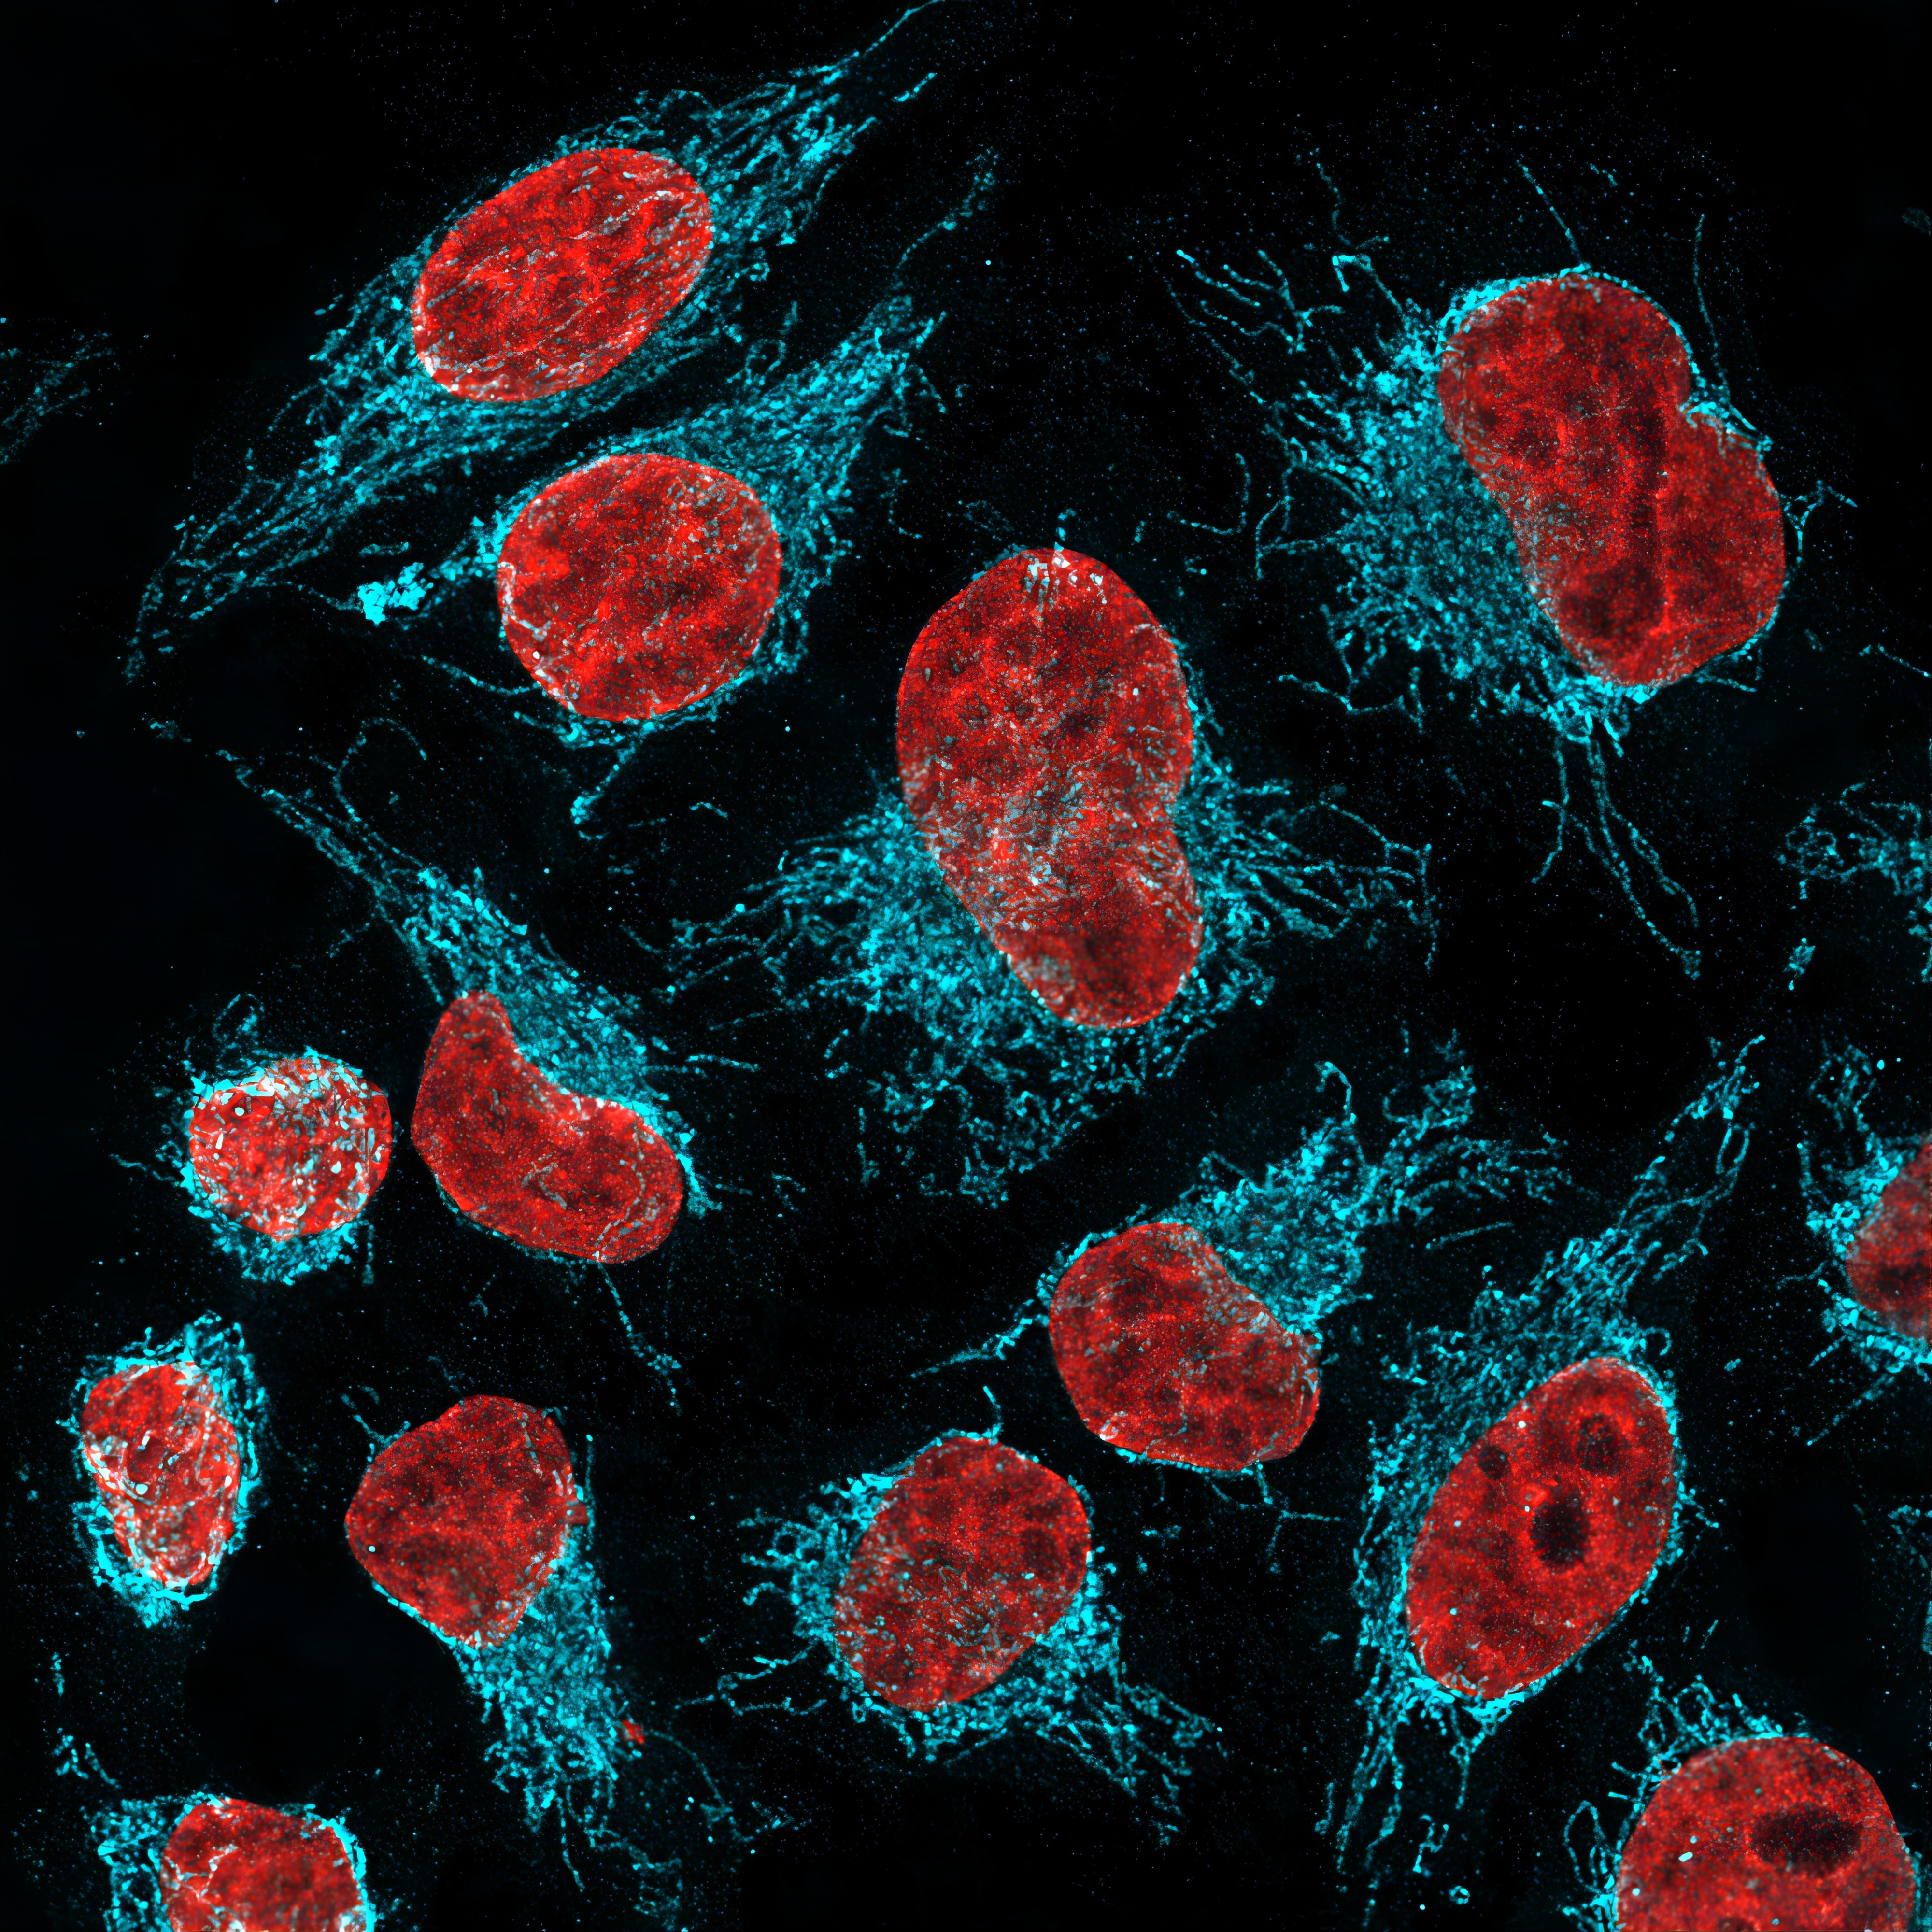 Immunofluorescence of HeLa: PFA-fixed HeLa cells were stained with anti-HSP60 (66041-1-Ig) labeled with FlexAble CoraLite® Plus 405 Kit (KFA026, cyan). Cell nuclei are in red. Confocal images were acquired with a 100x oil objective and post-processed. Images were recorded at the Core Facility Bioimaging at the Biomedical Center, LMU Munich. 